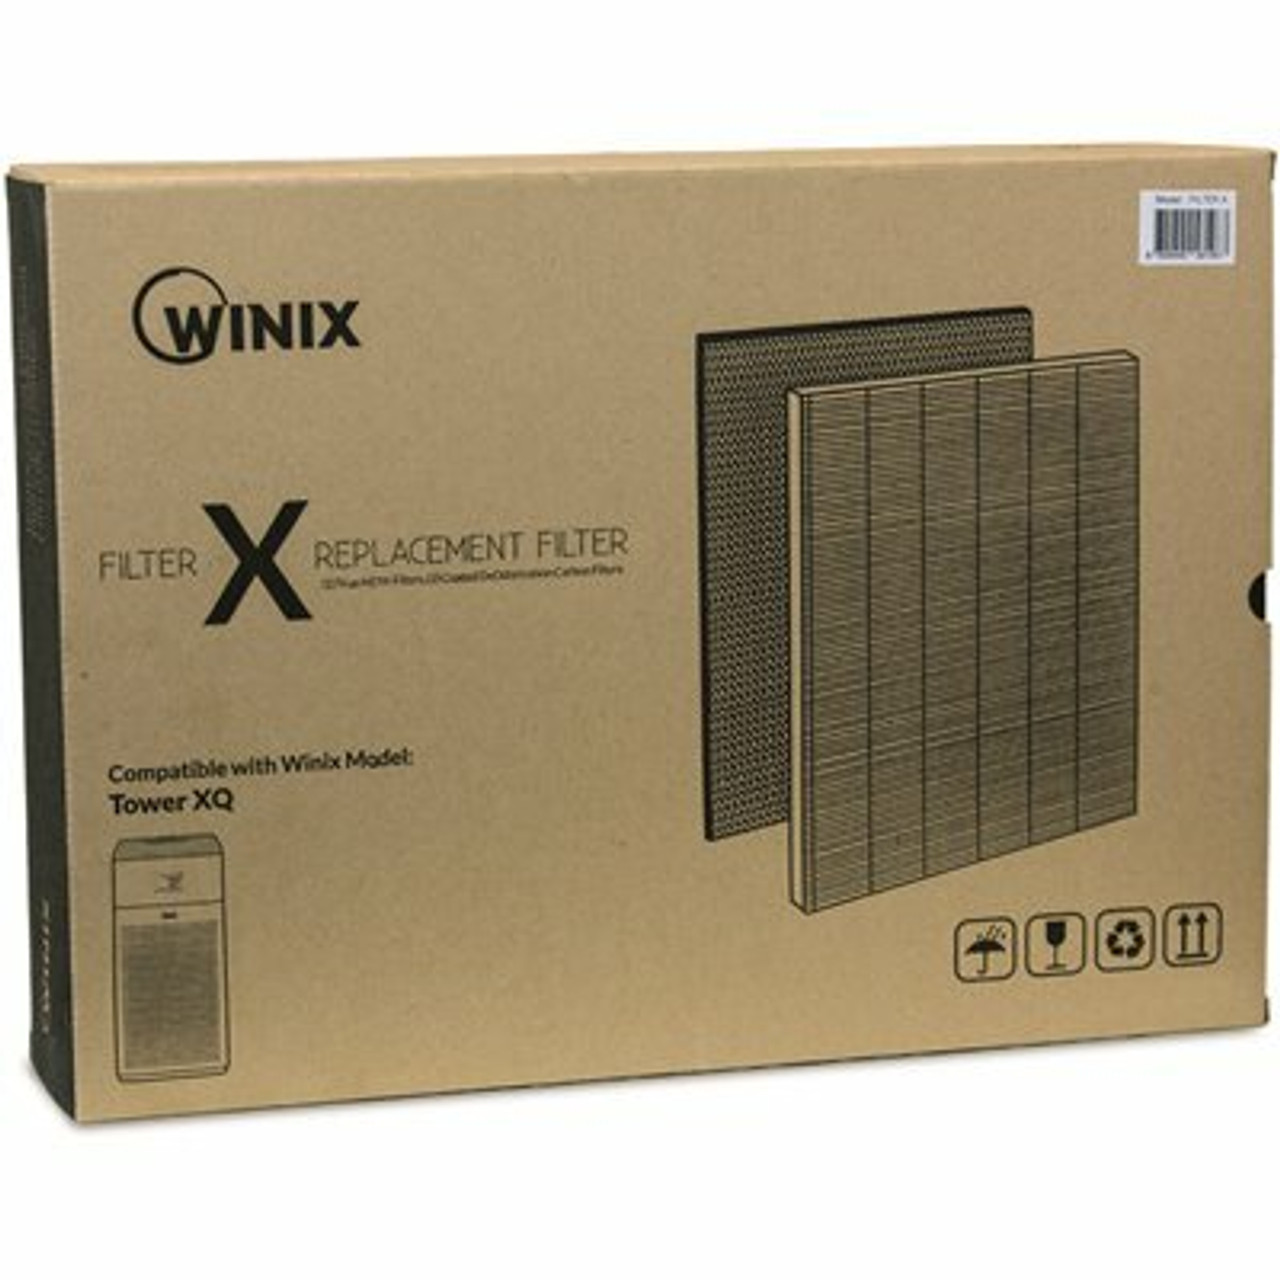 Winix Replacement Filter X For Xq Air Purifier